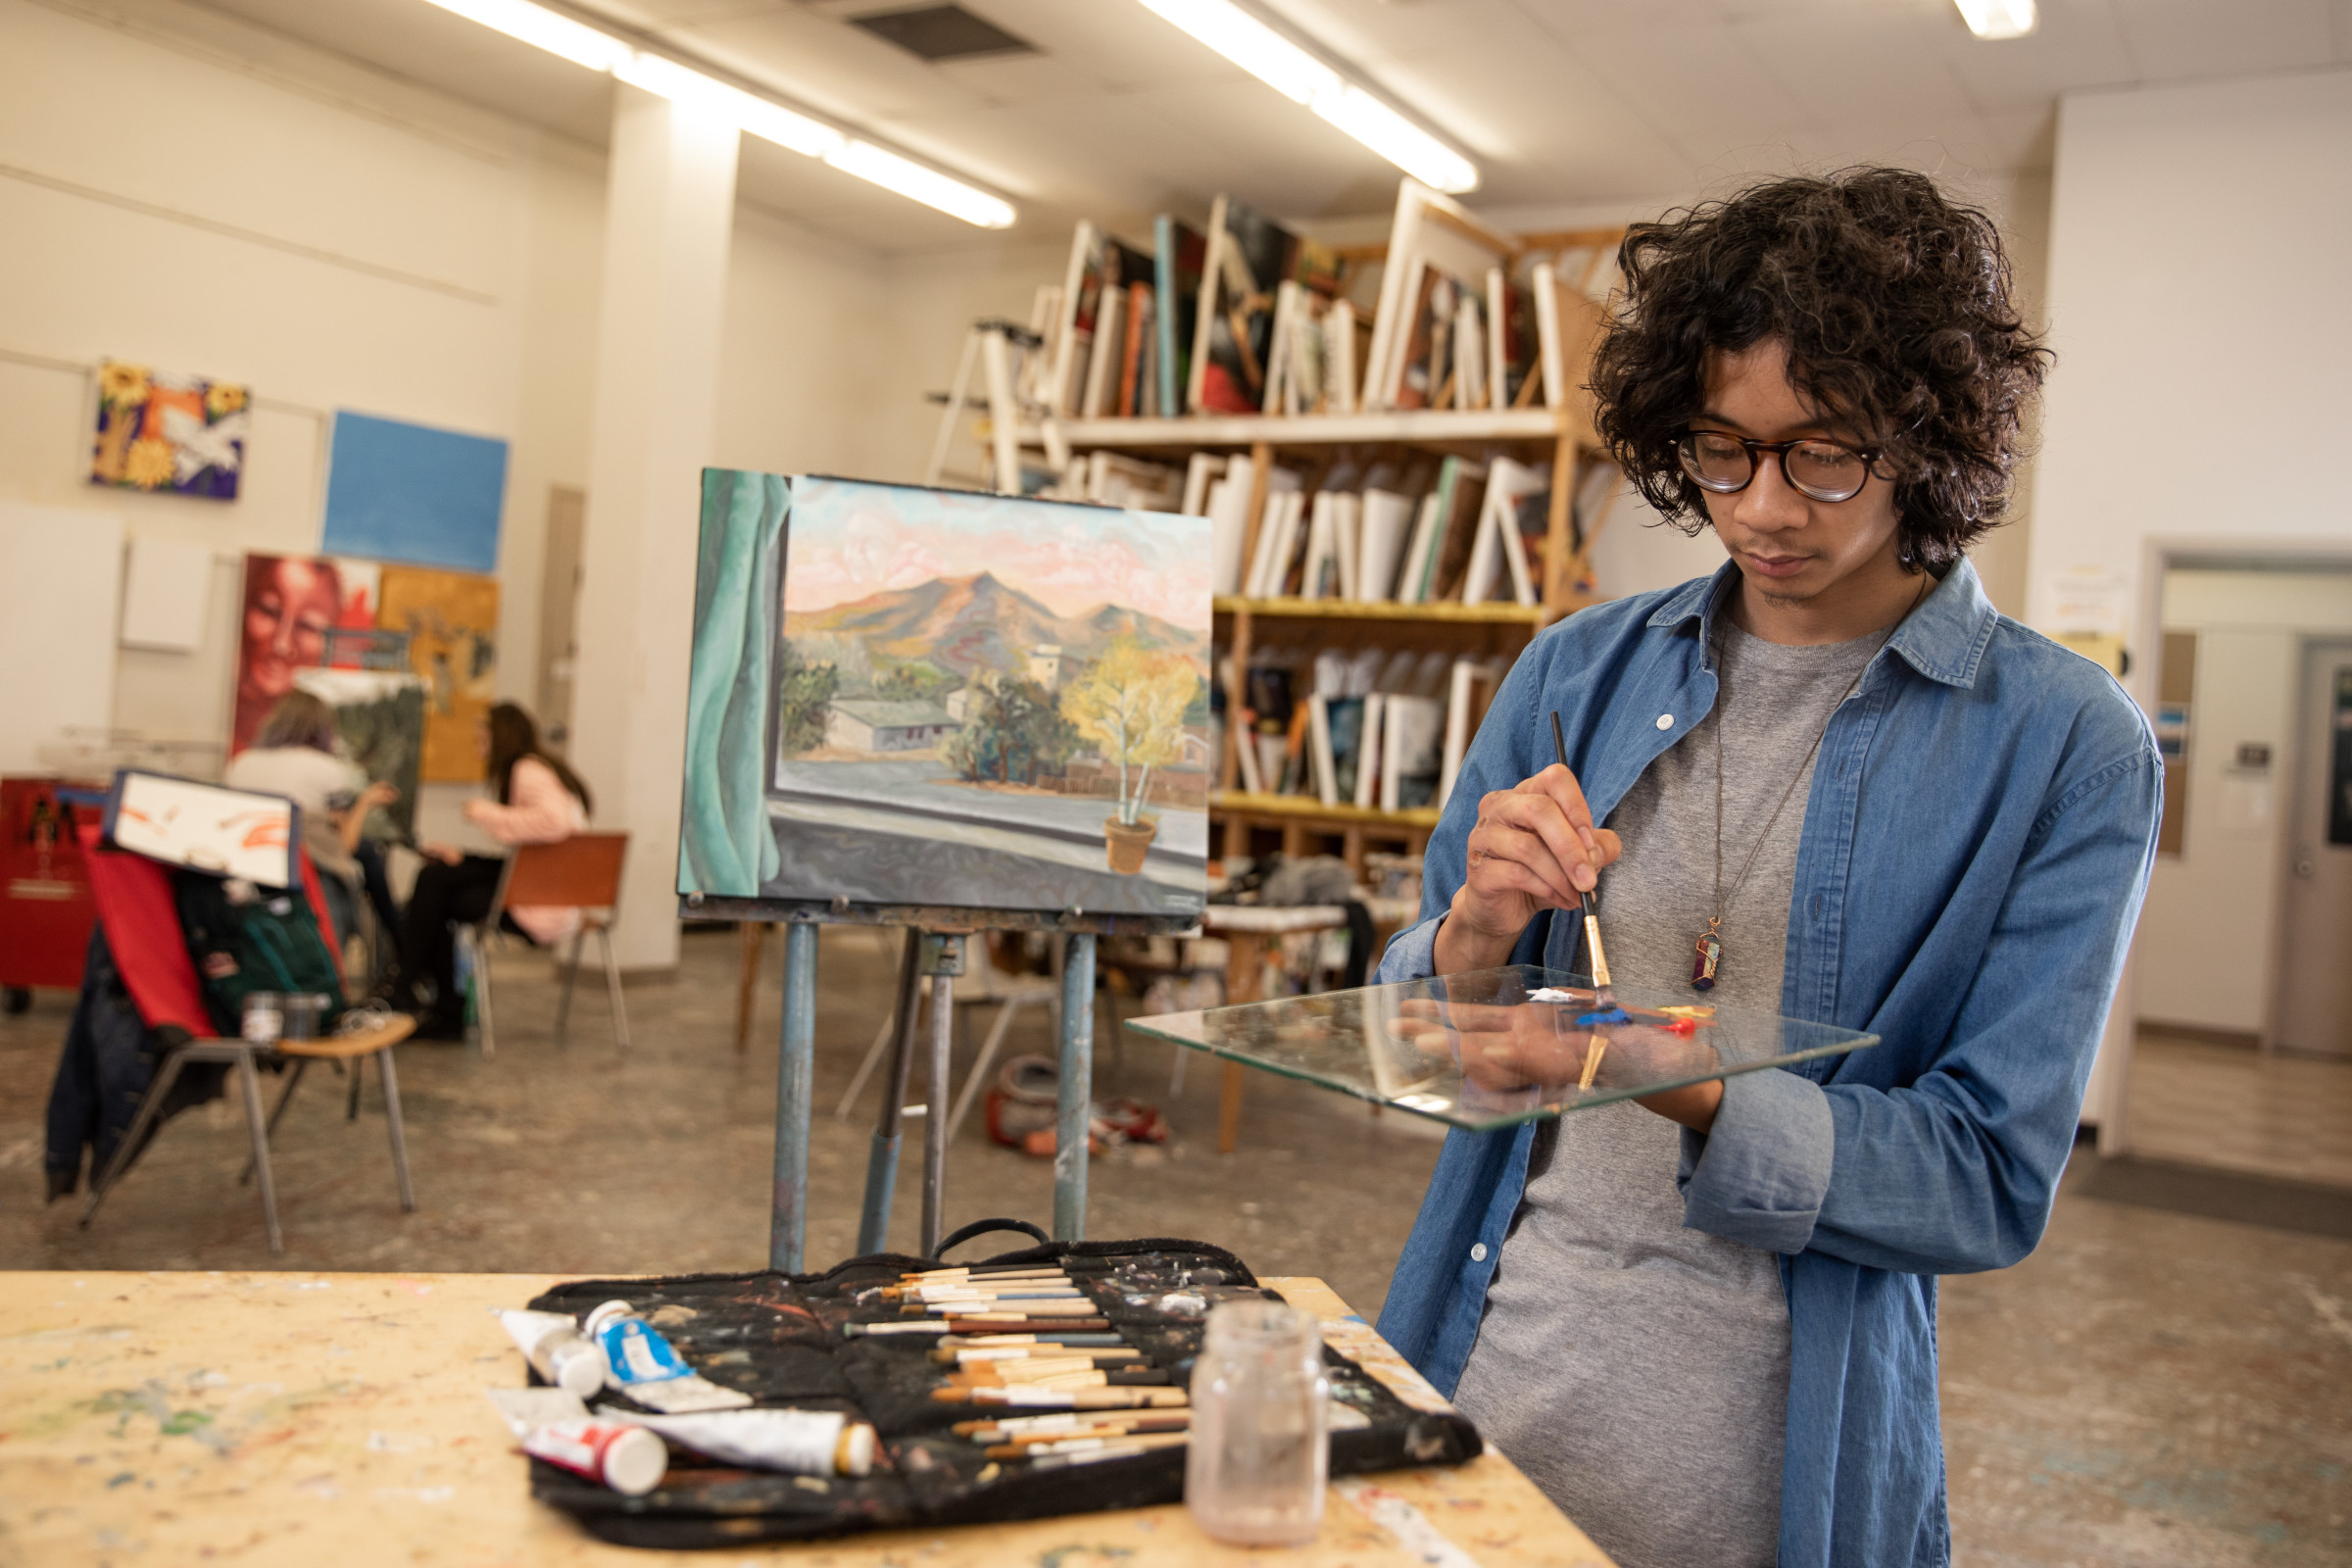 A student painting Flagstaff locations.